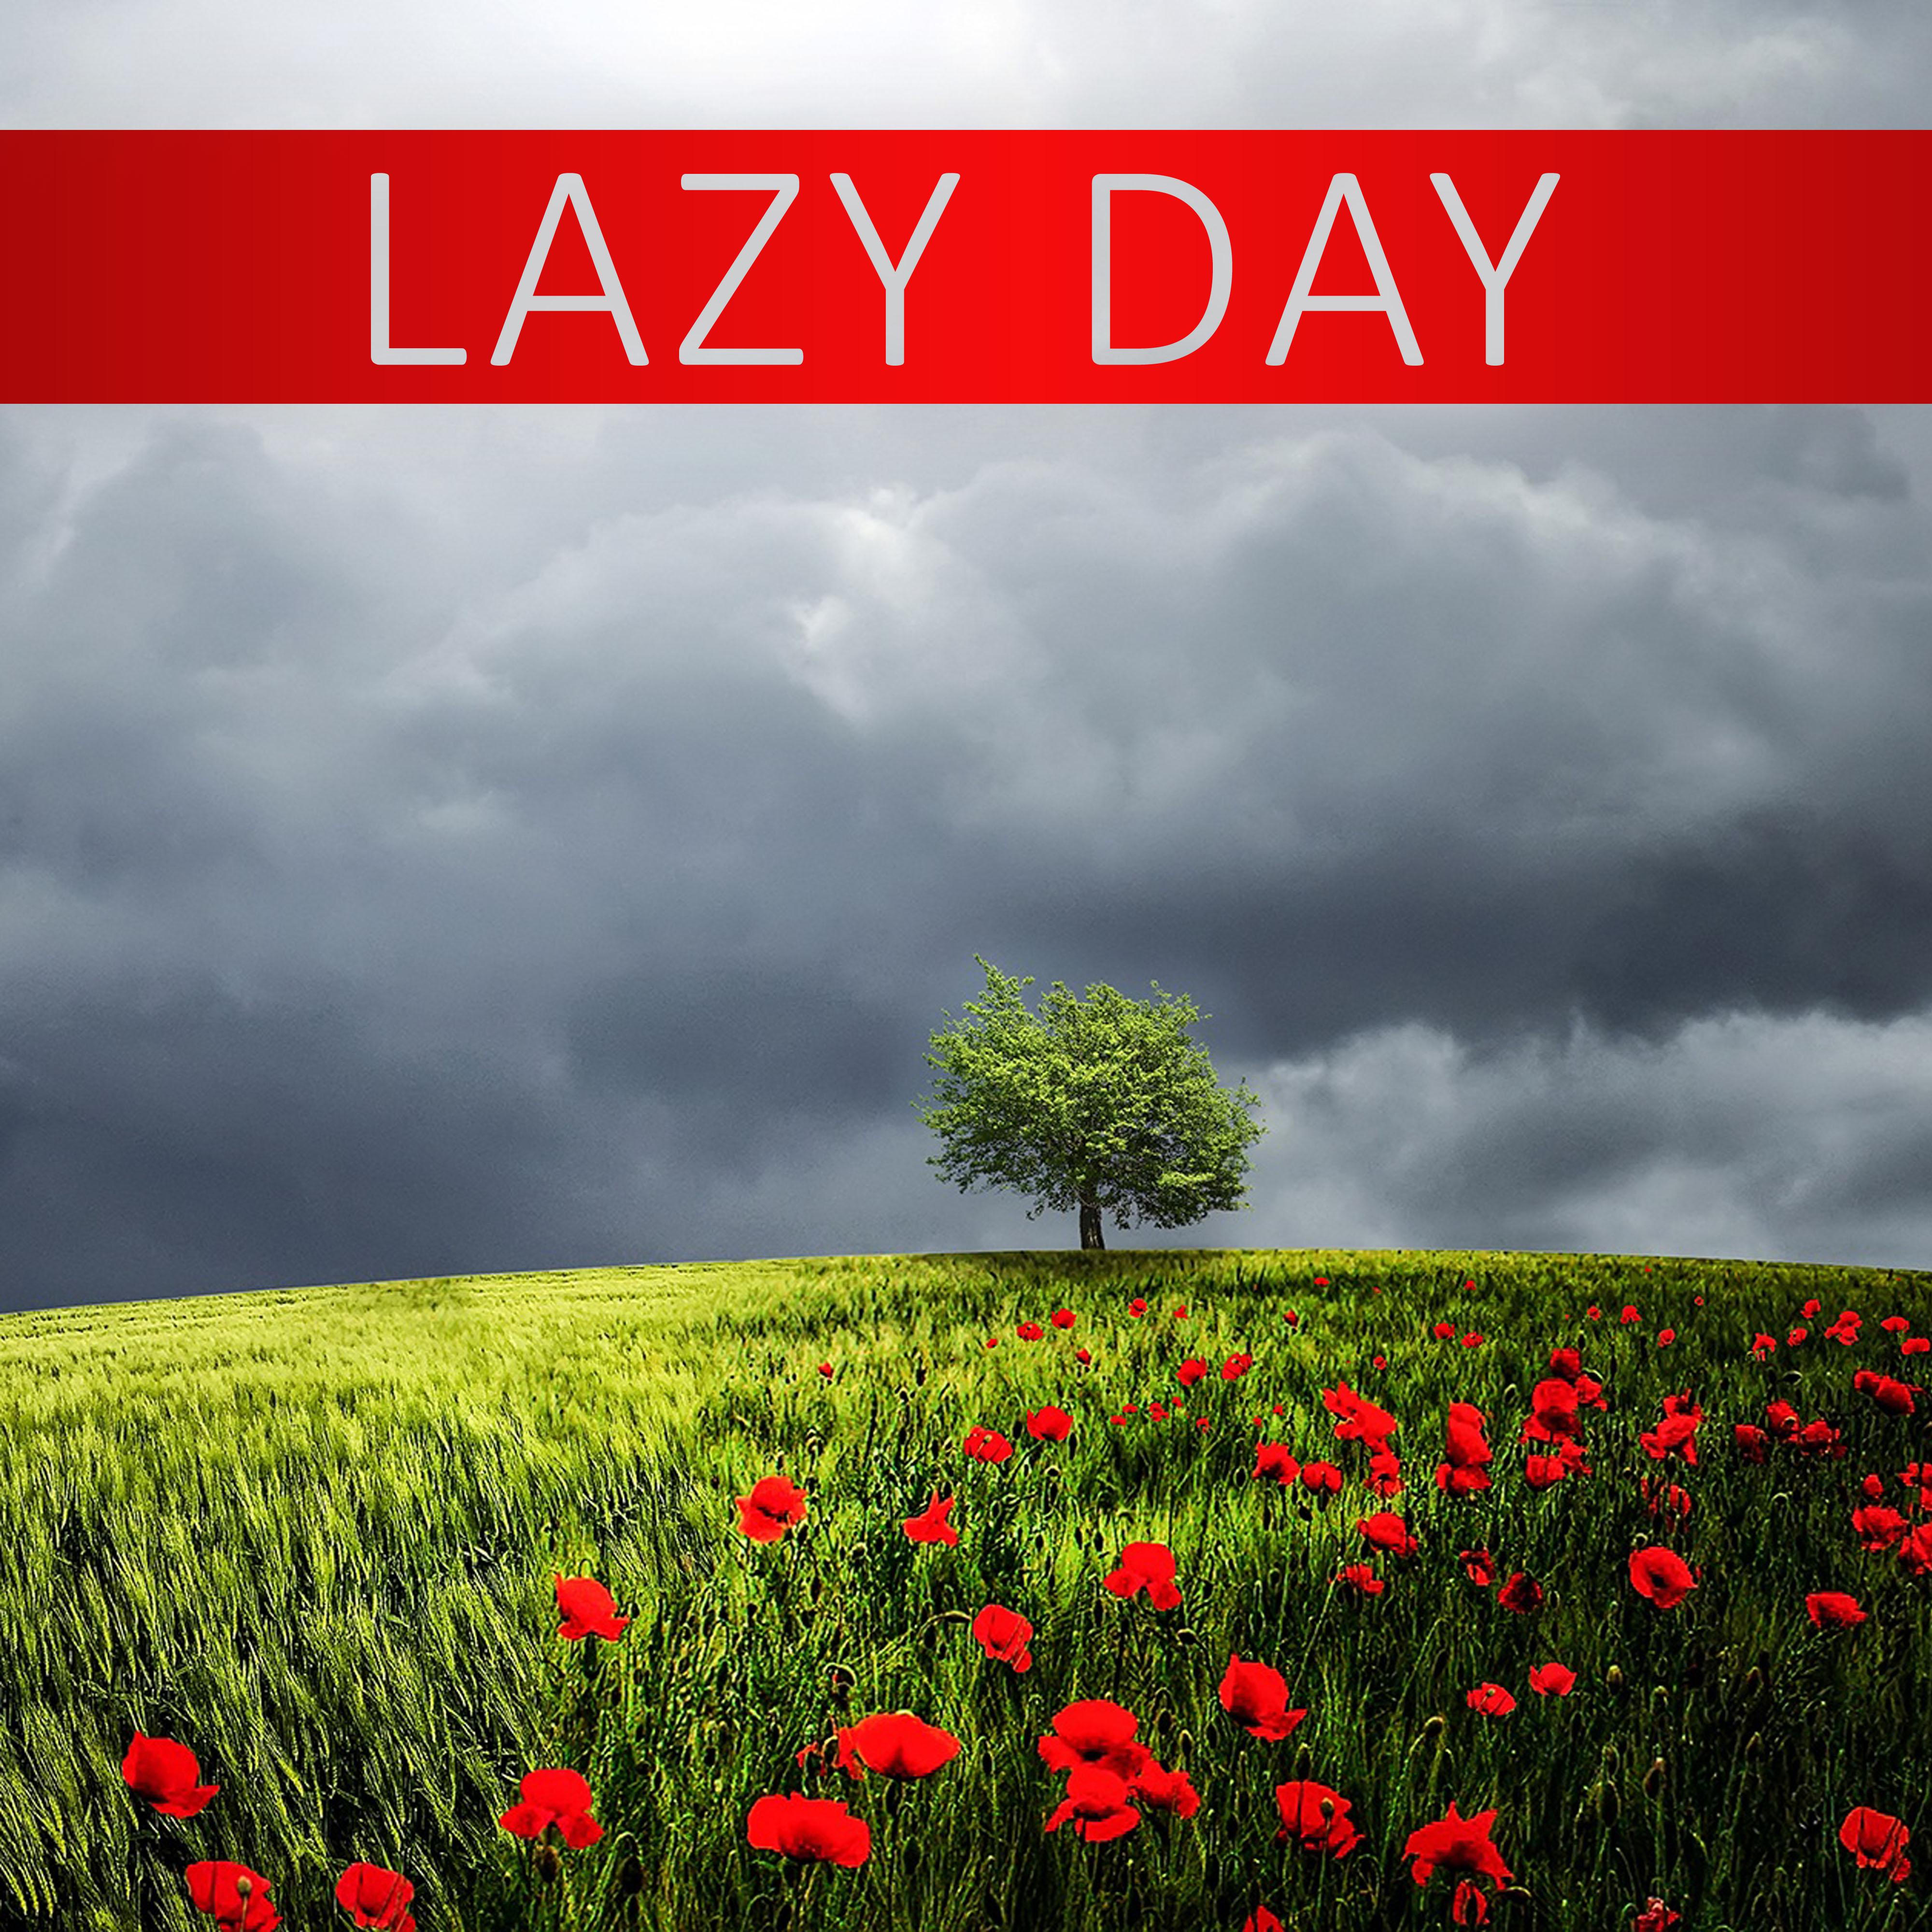 Lazy Day  New Age Music for Total Relaxation, Calmness Day at Home, Sounds of Nature to Reduce Stress and Relax